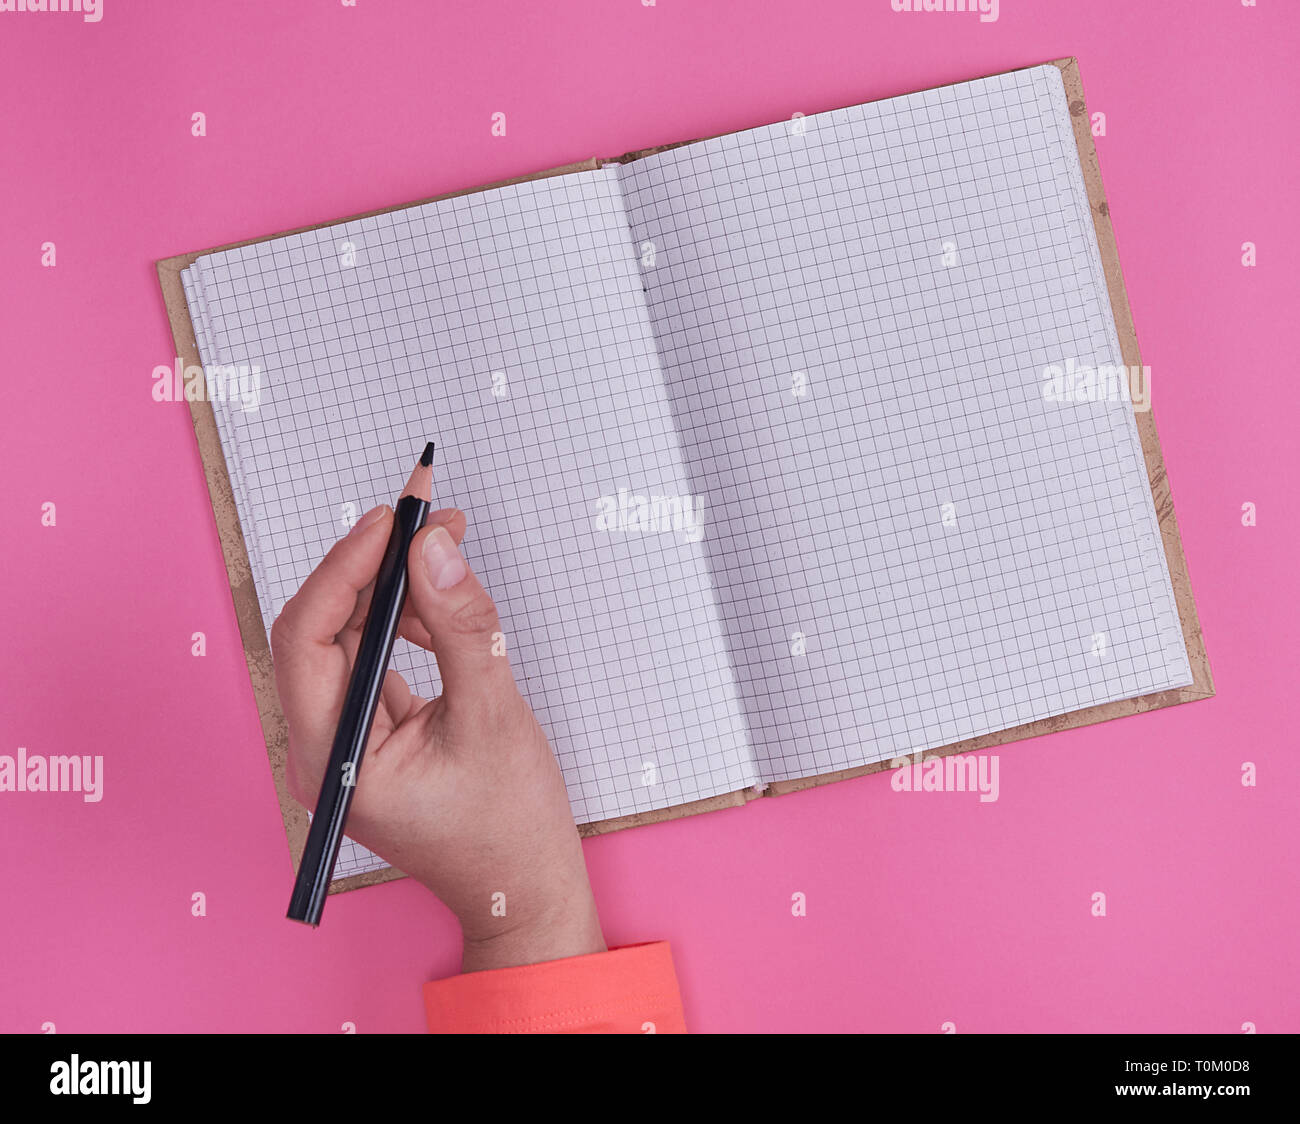 Human Hand Reading Blank Paper Notebook Stock Photo 197522195